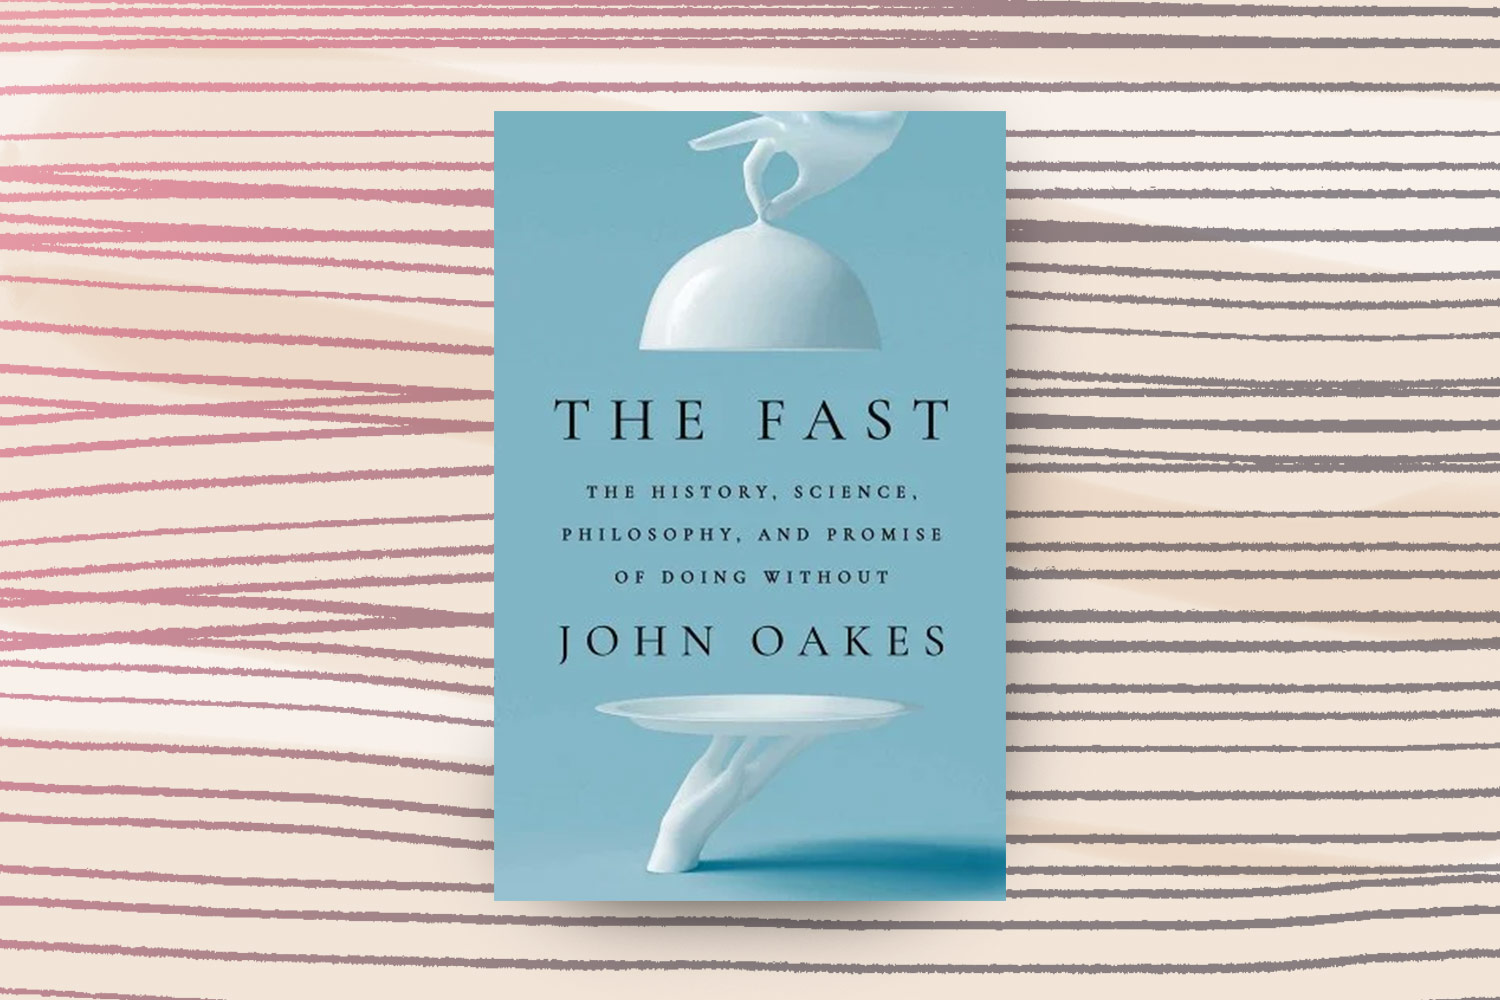 John Oakes, The Fast: The History, Science, Philosophy, and Promise of Doing Without